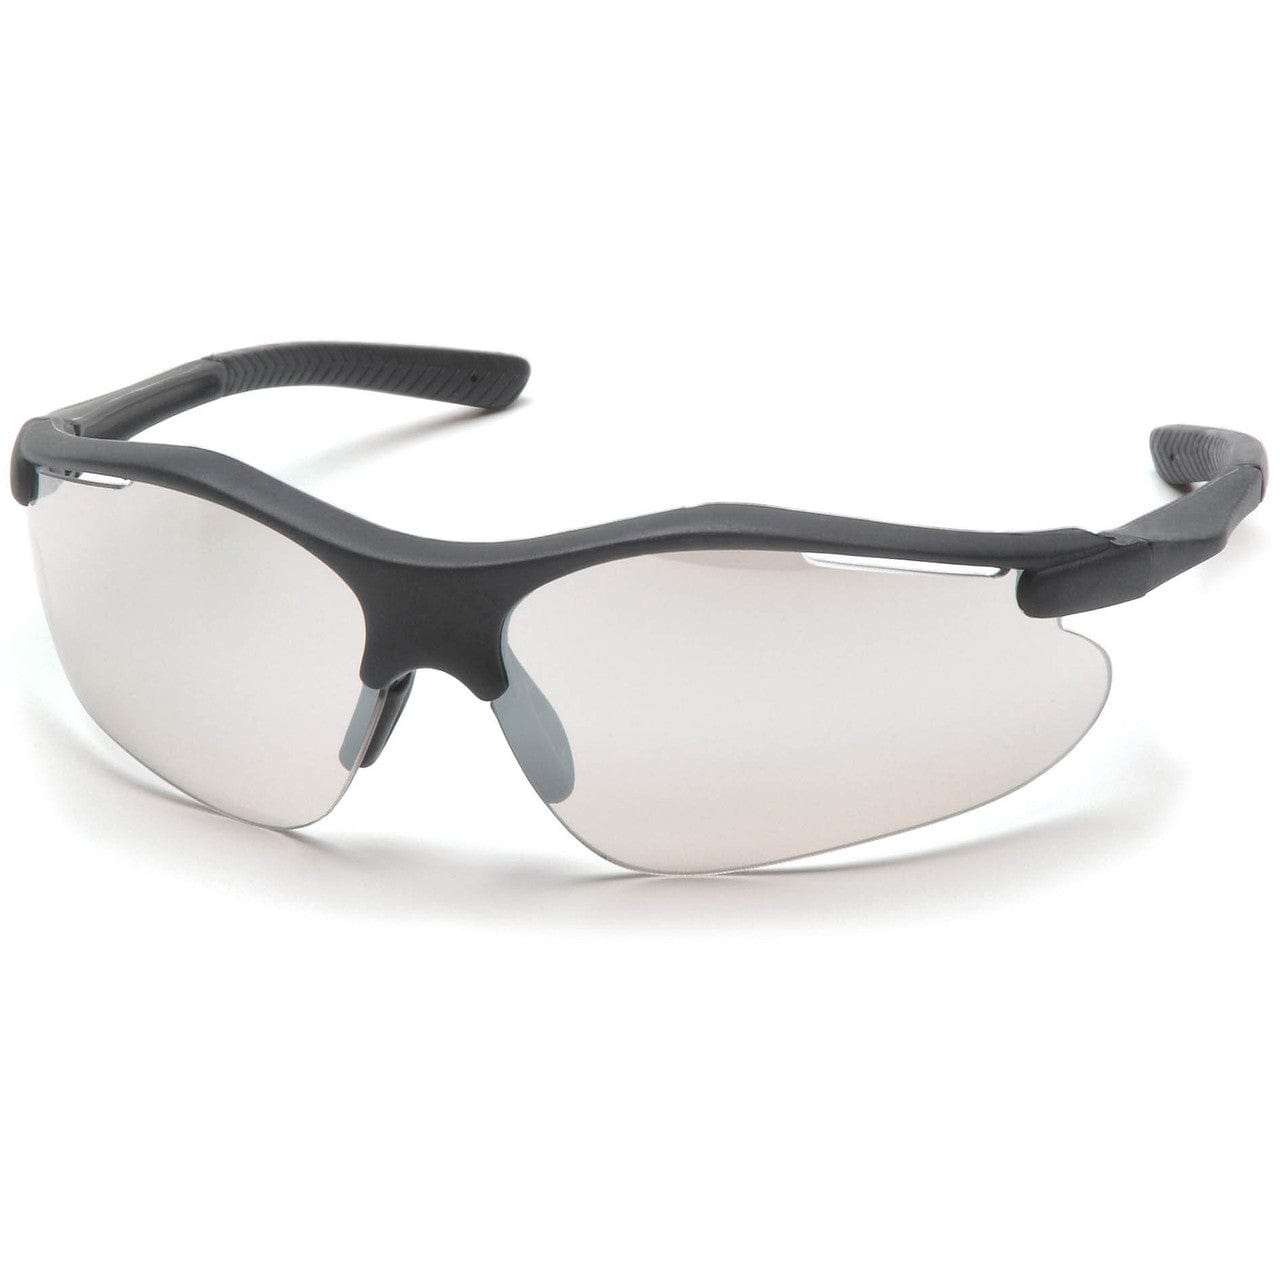 Pyramex Fortress Safety Glasses with Black Frame and Indoor/Outdoor Lens SB3780D